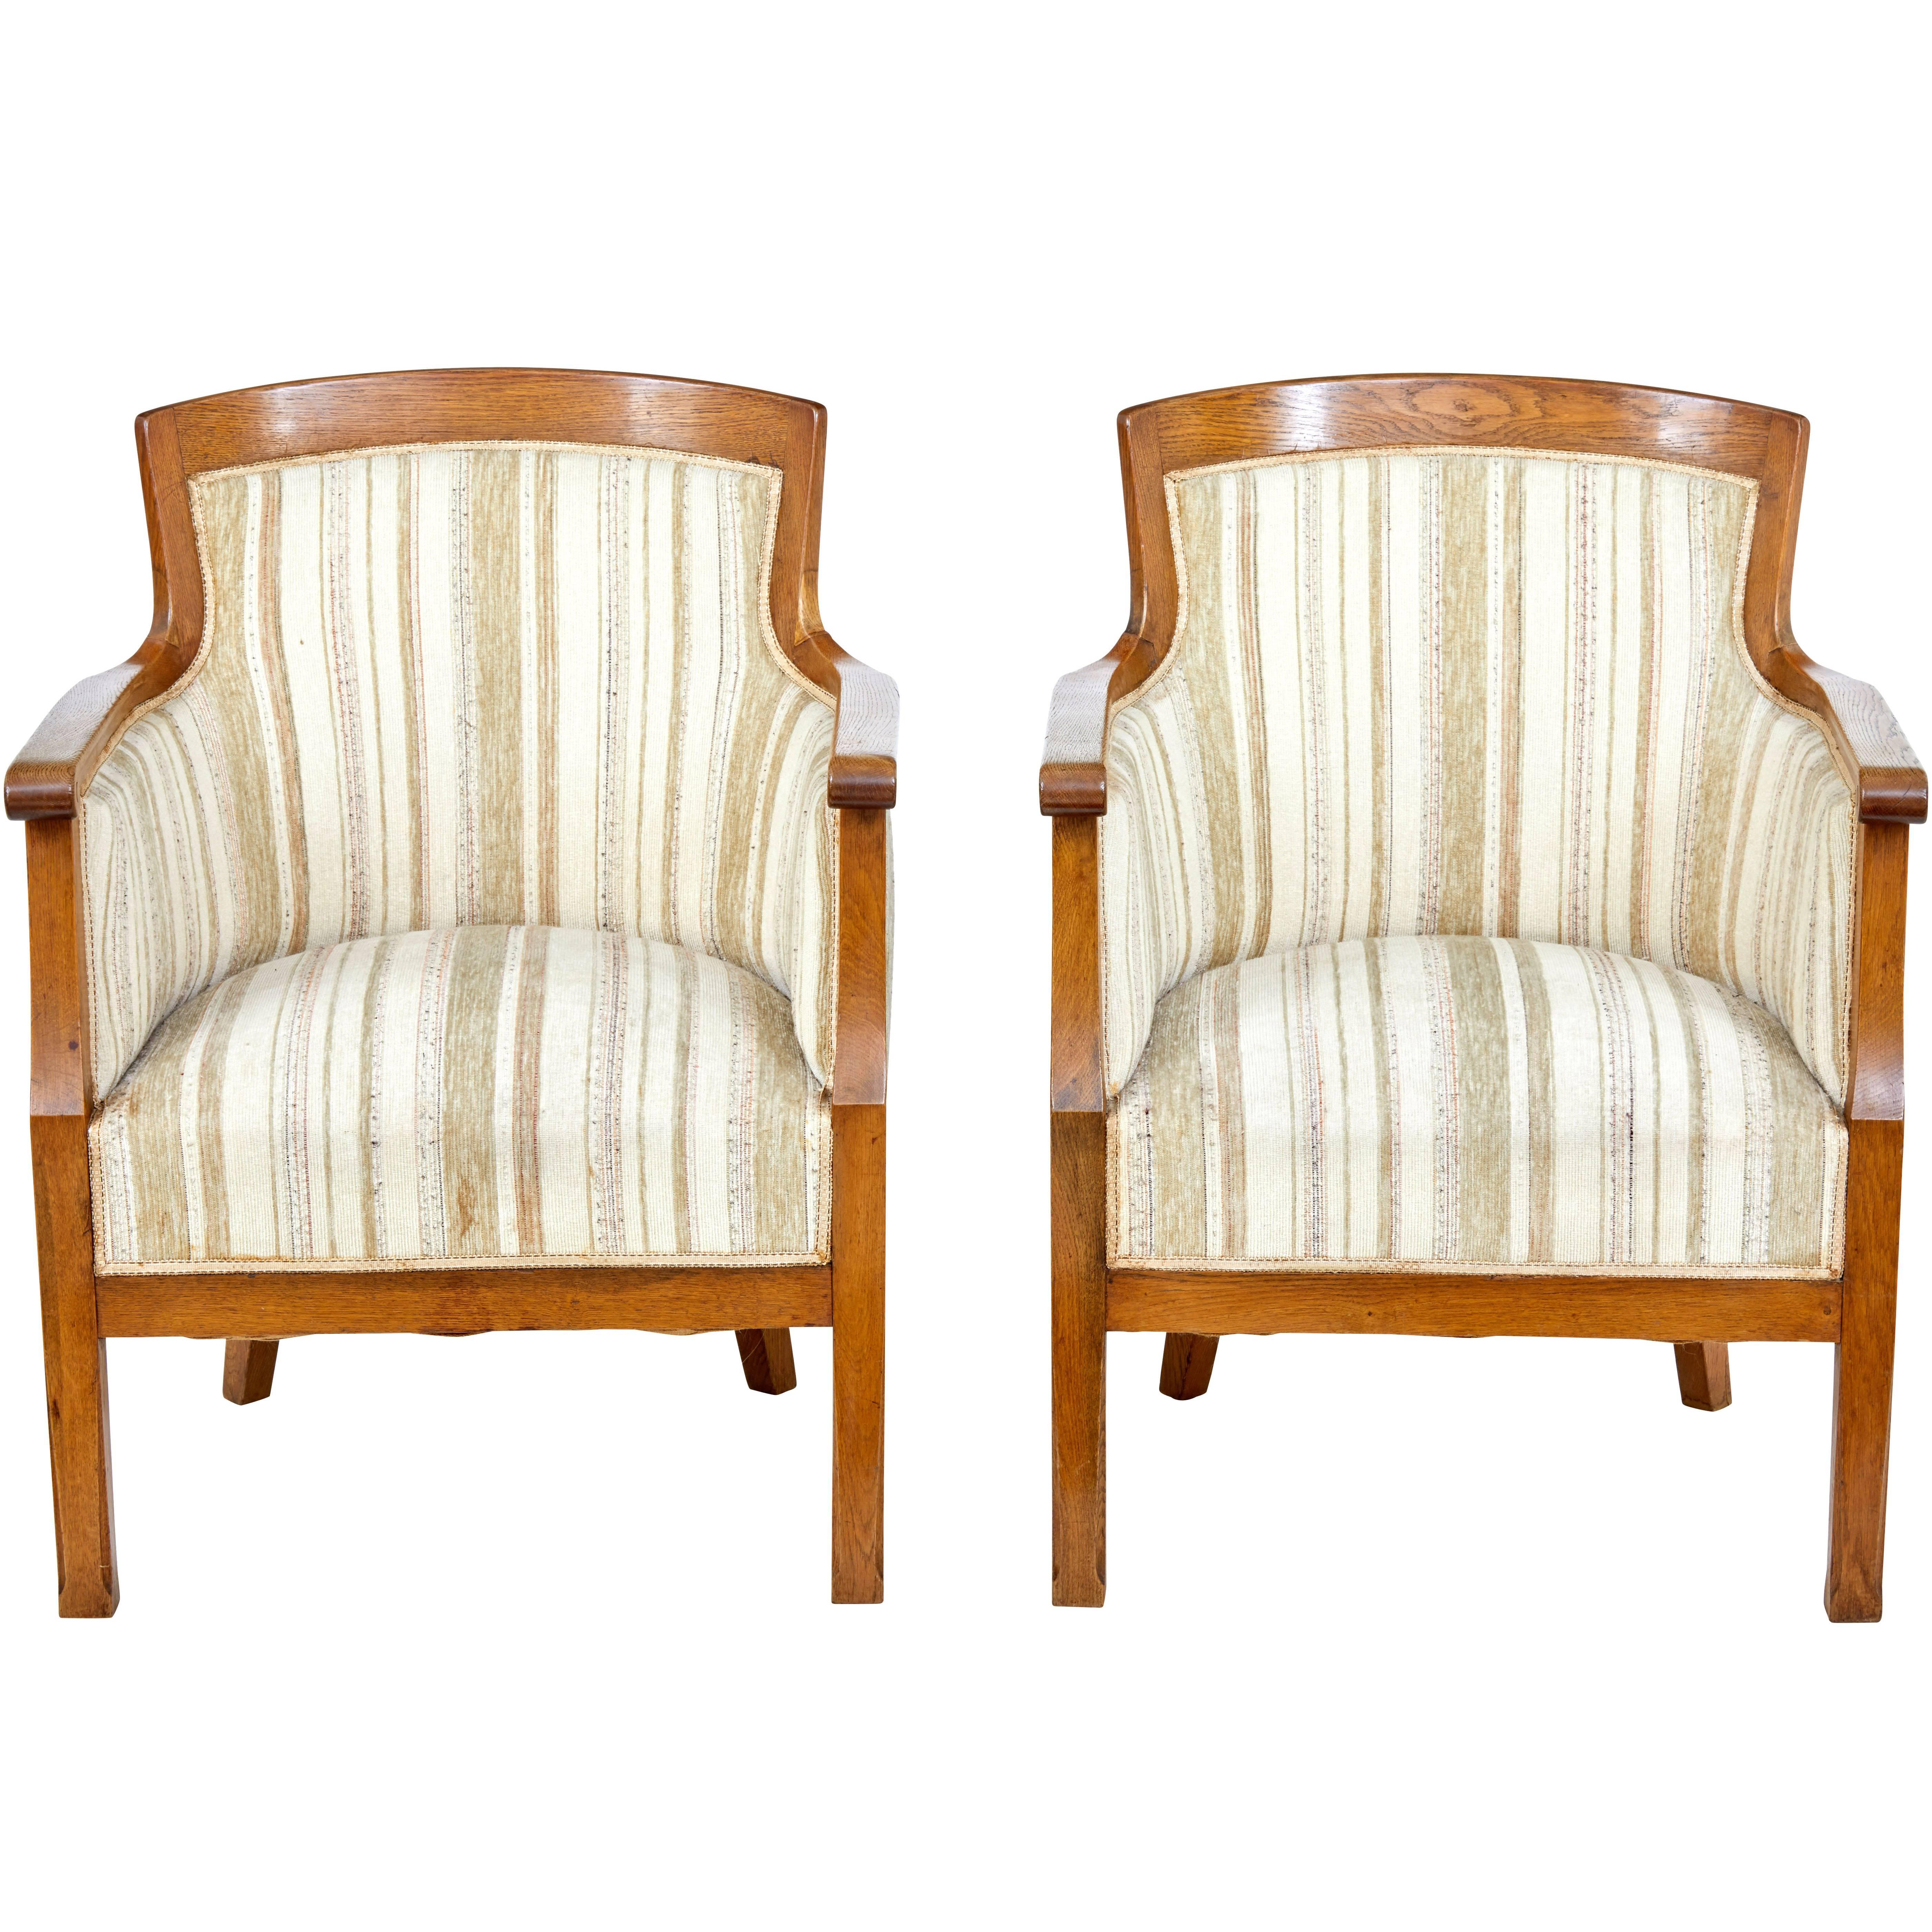 Pair of Late 19th Century Oak Armchairs